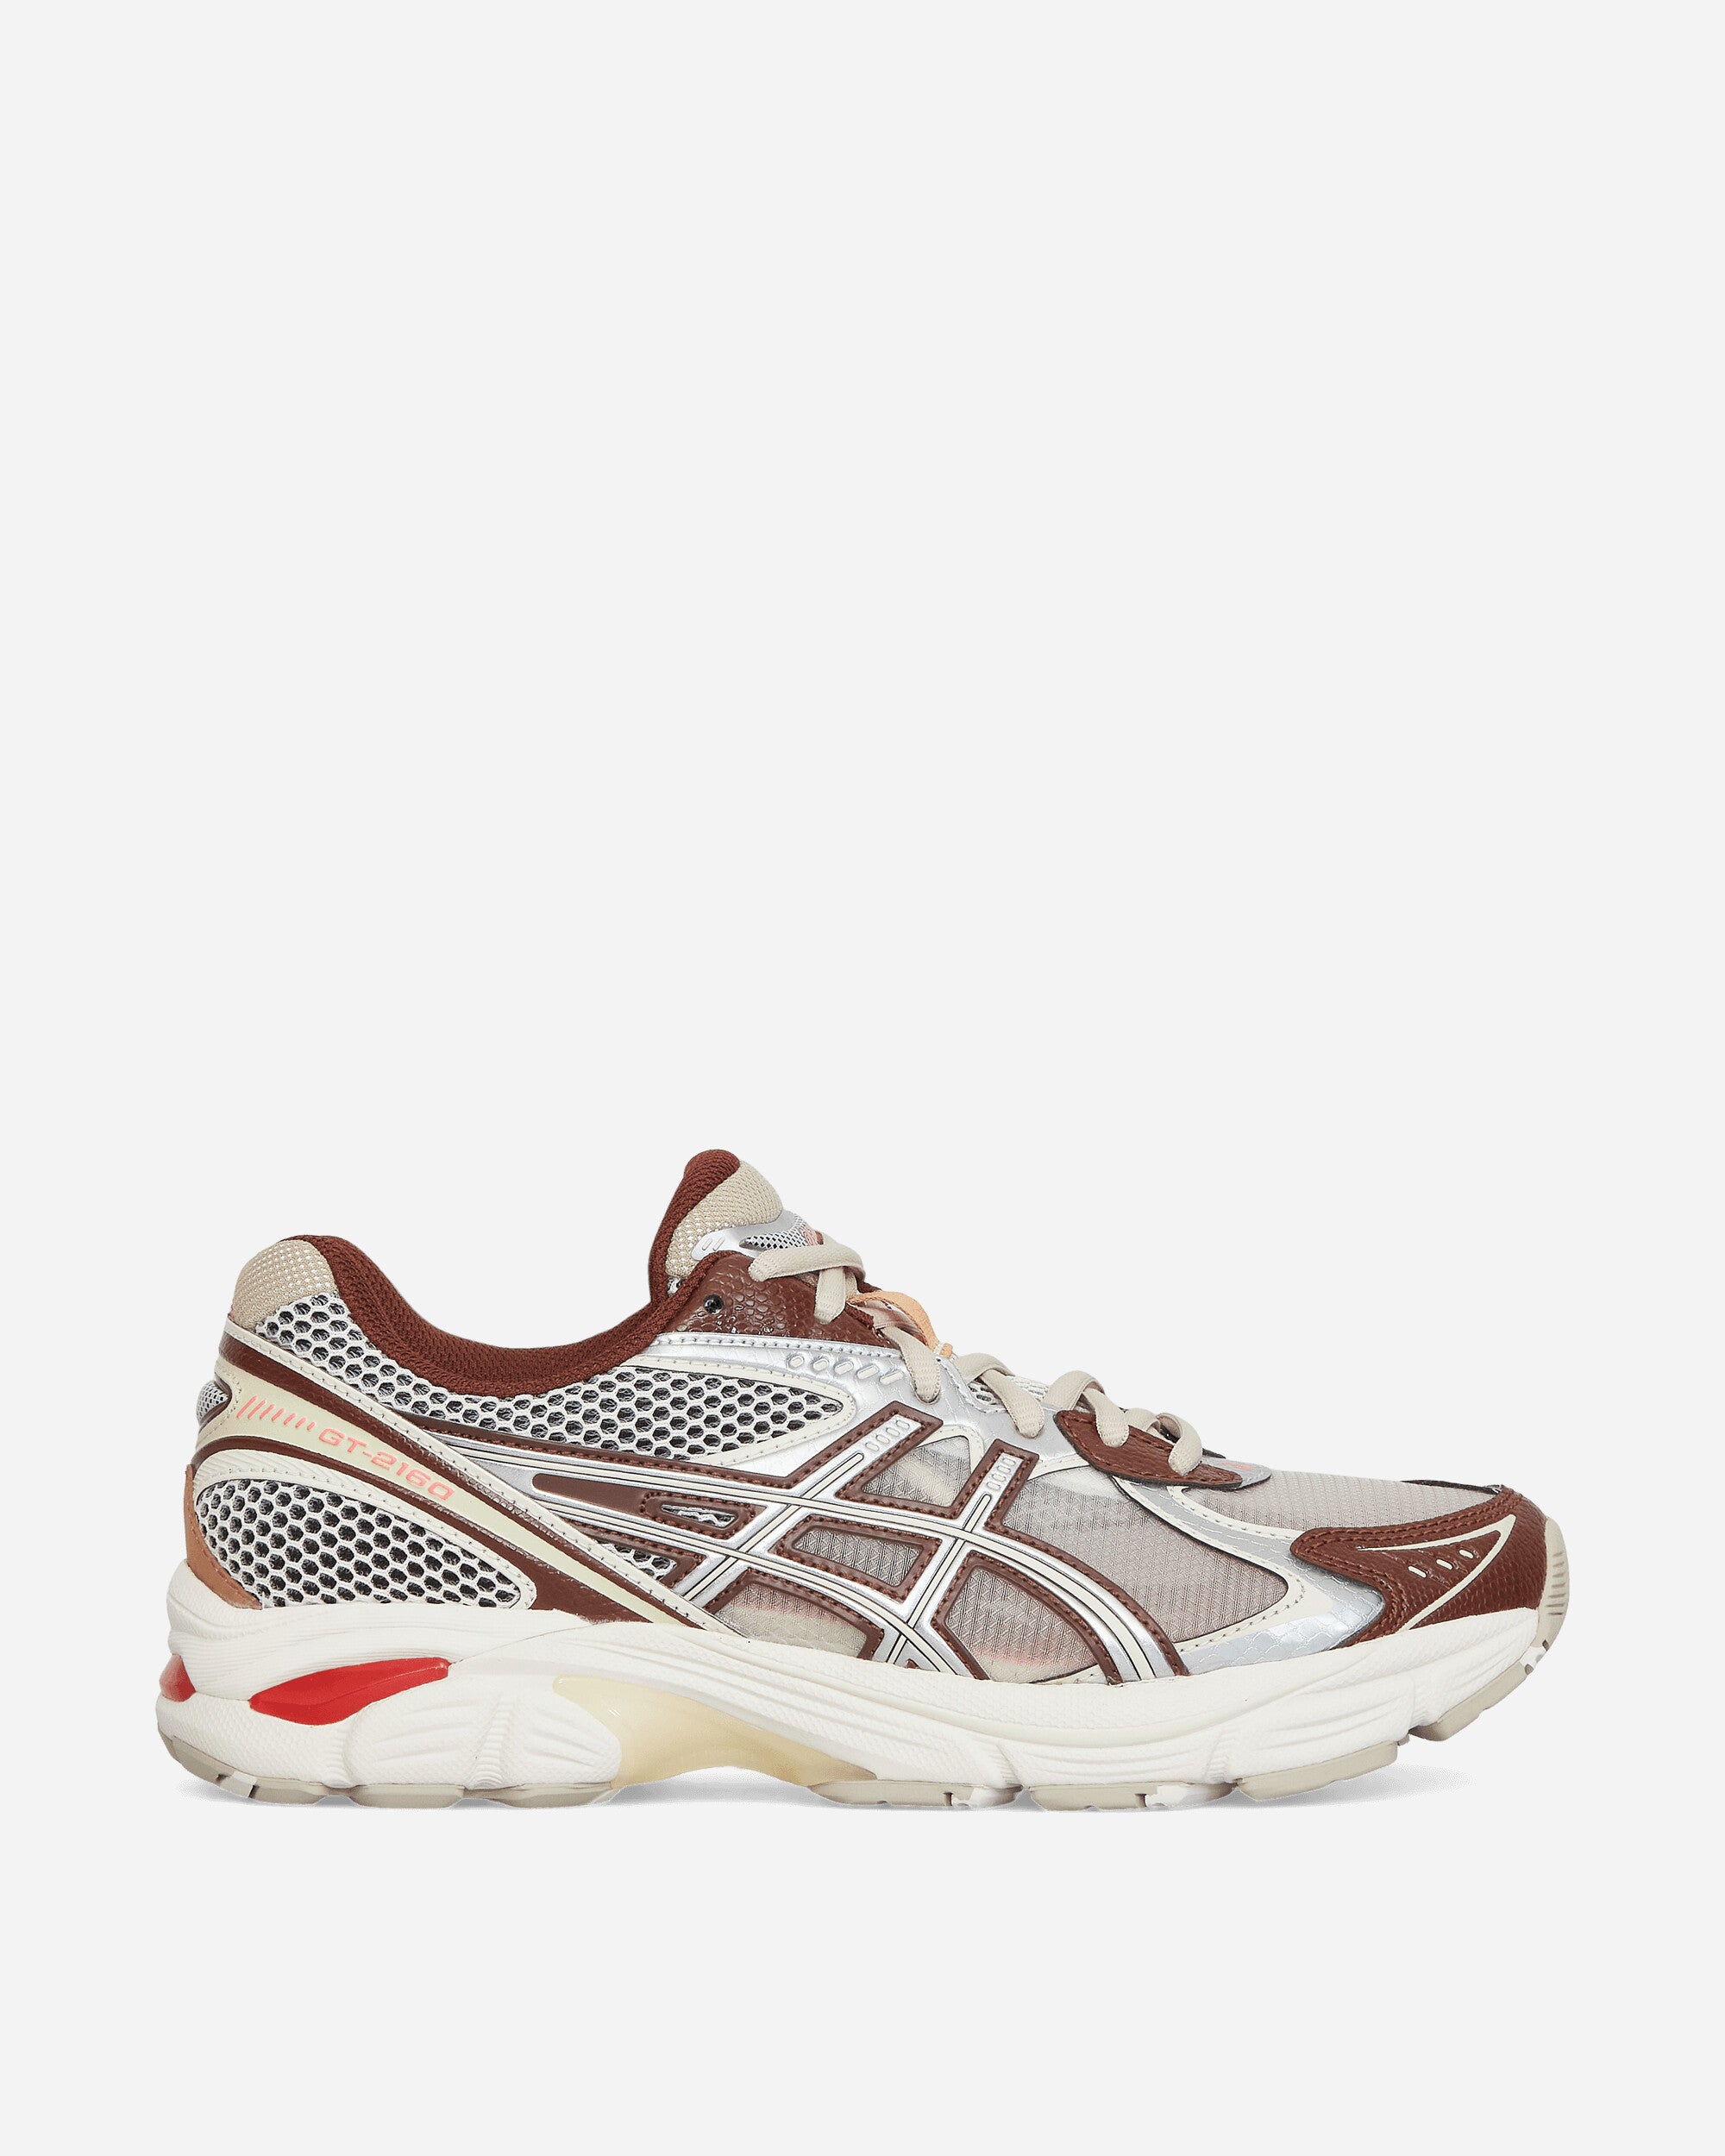 Asics Gt-2160 Cream/Chocolate Brown Sneakers Low 1203A654-100